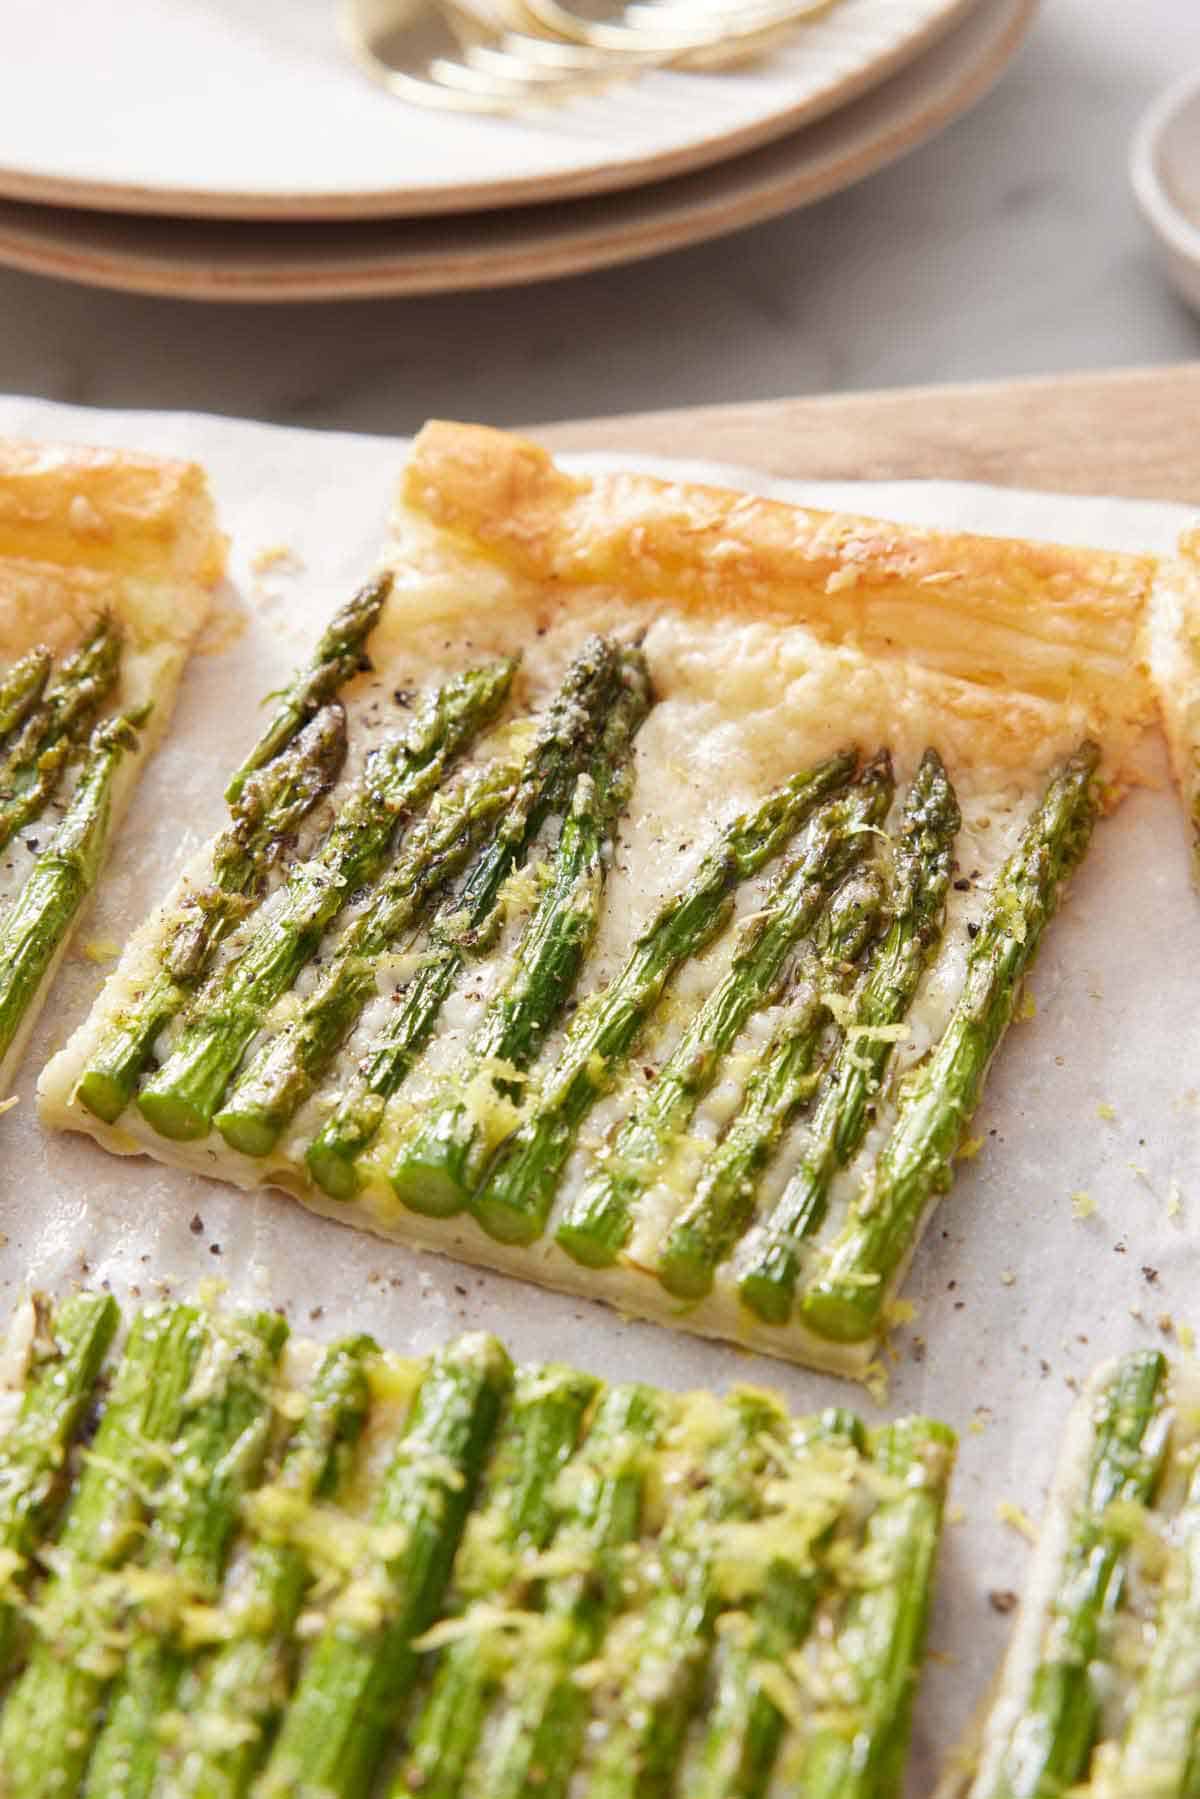 A slice of asparagus tart slightly pulled away from the rest of the tart on a sheet of parchment.